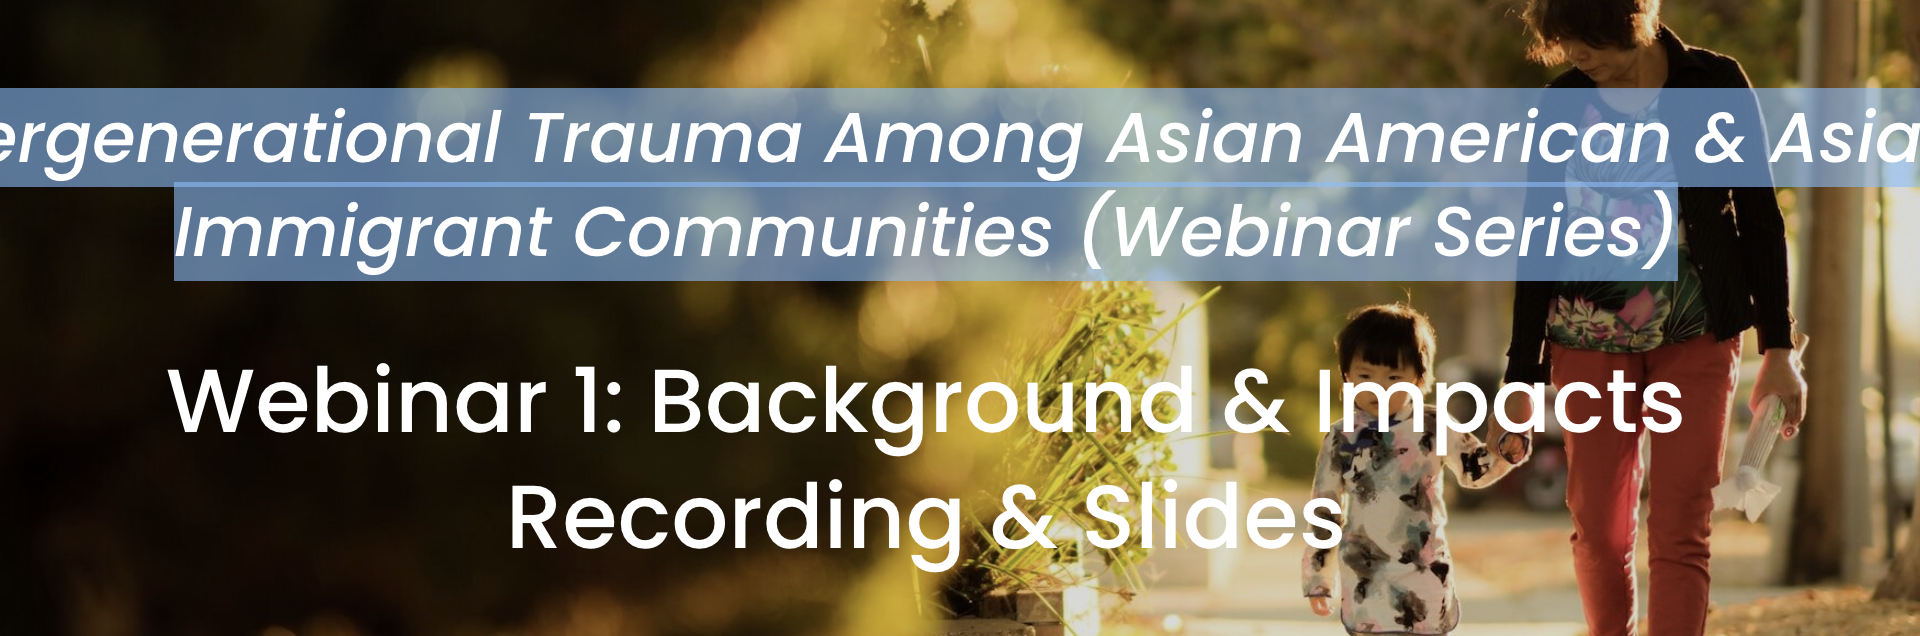 A webinar series for Intergenerational Trauma Among Asian American & Asian Immigrant Communities